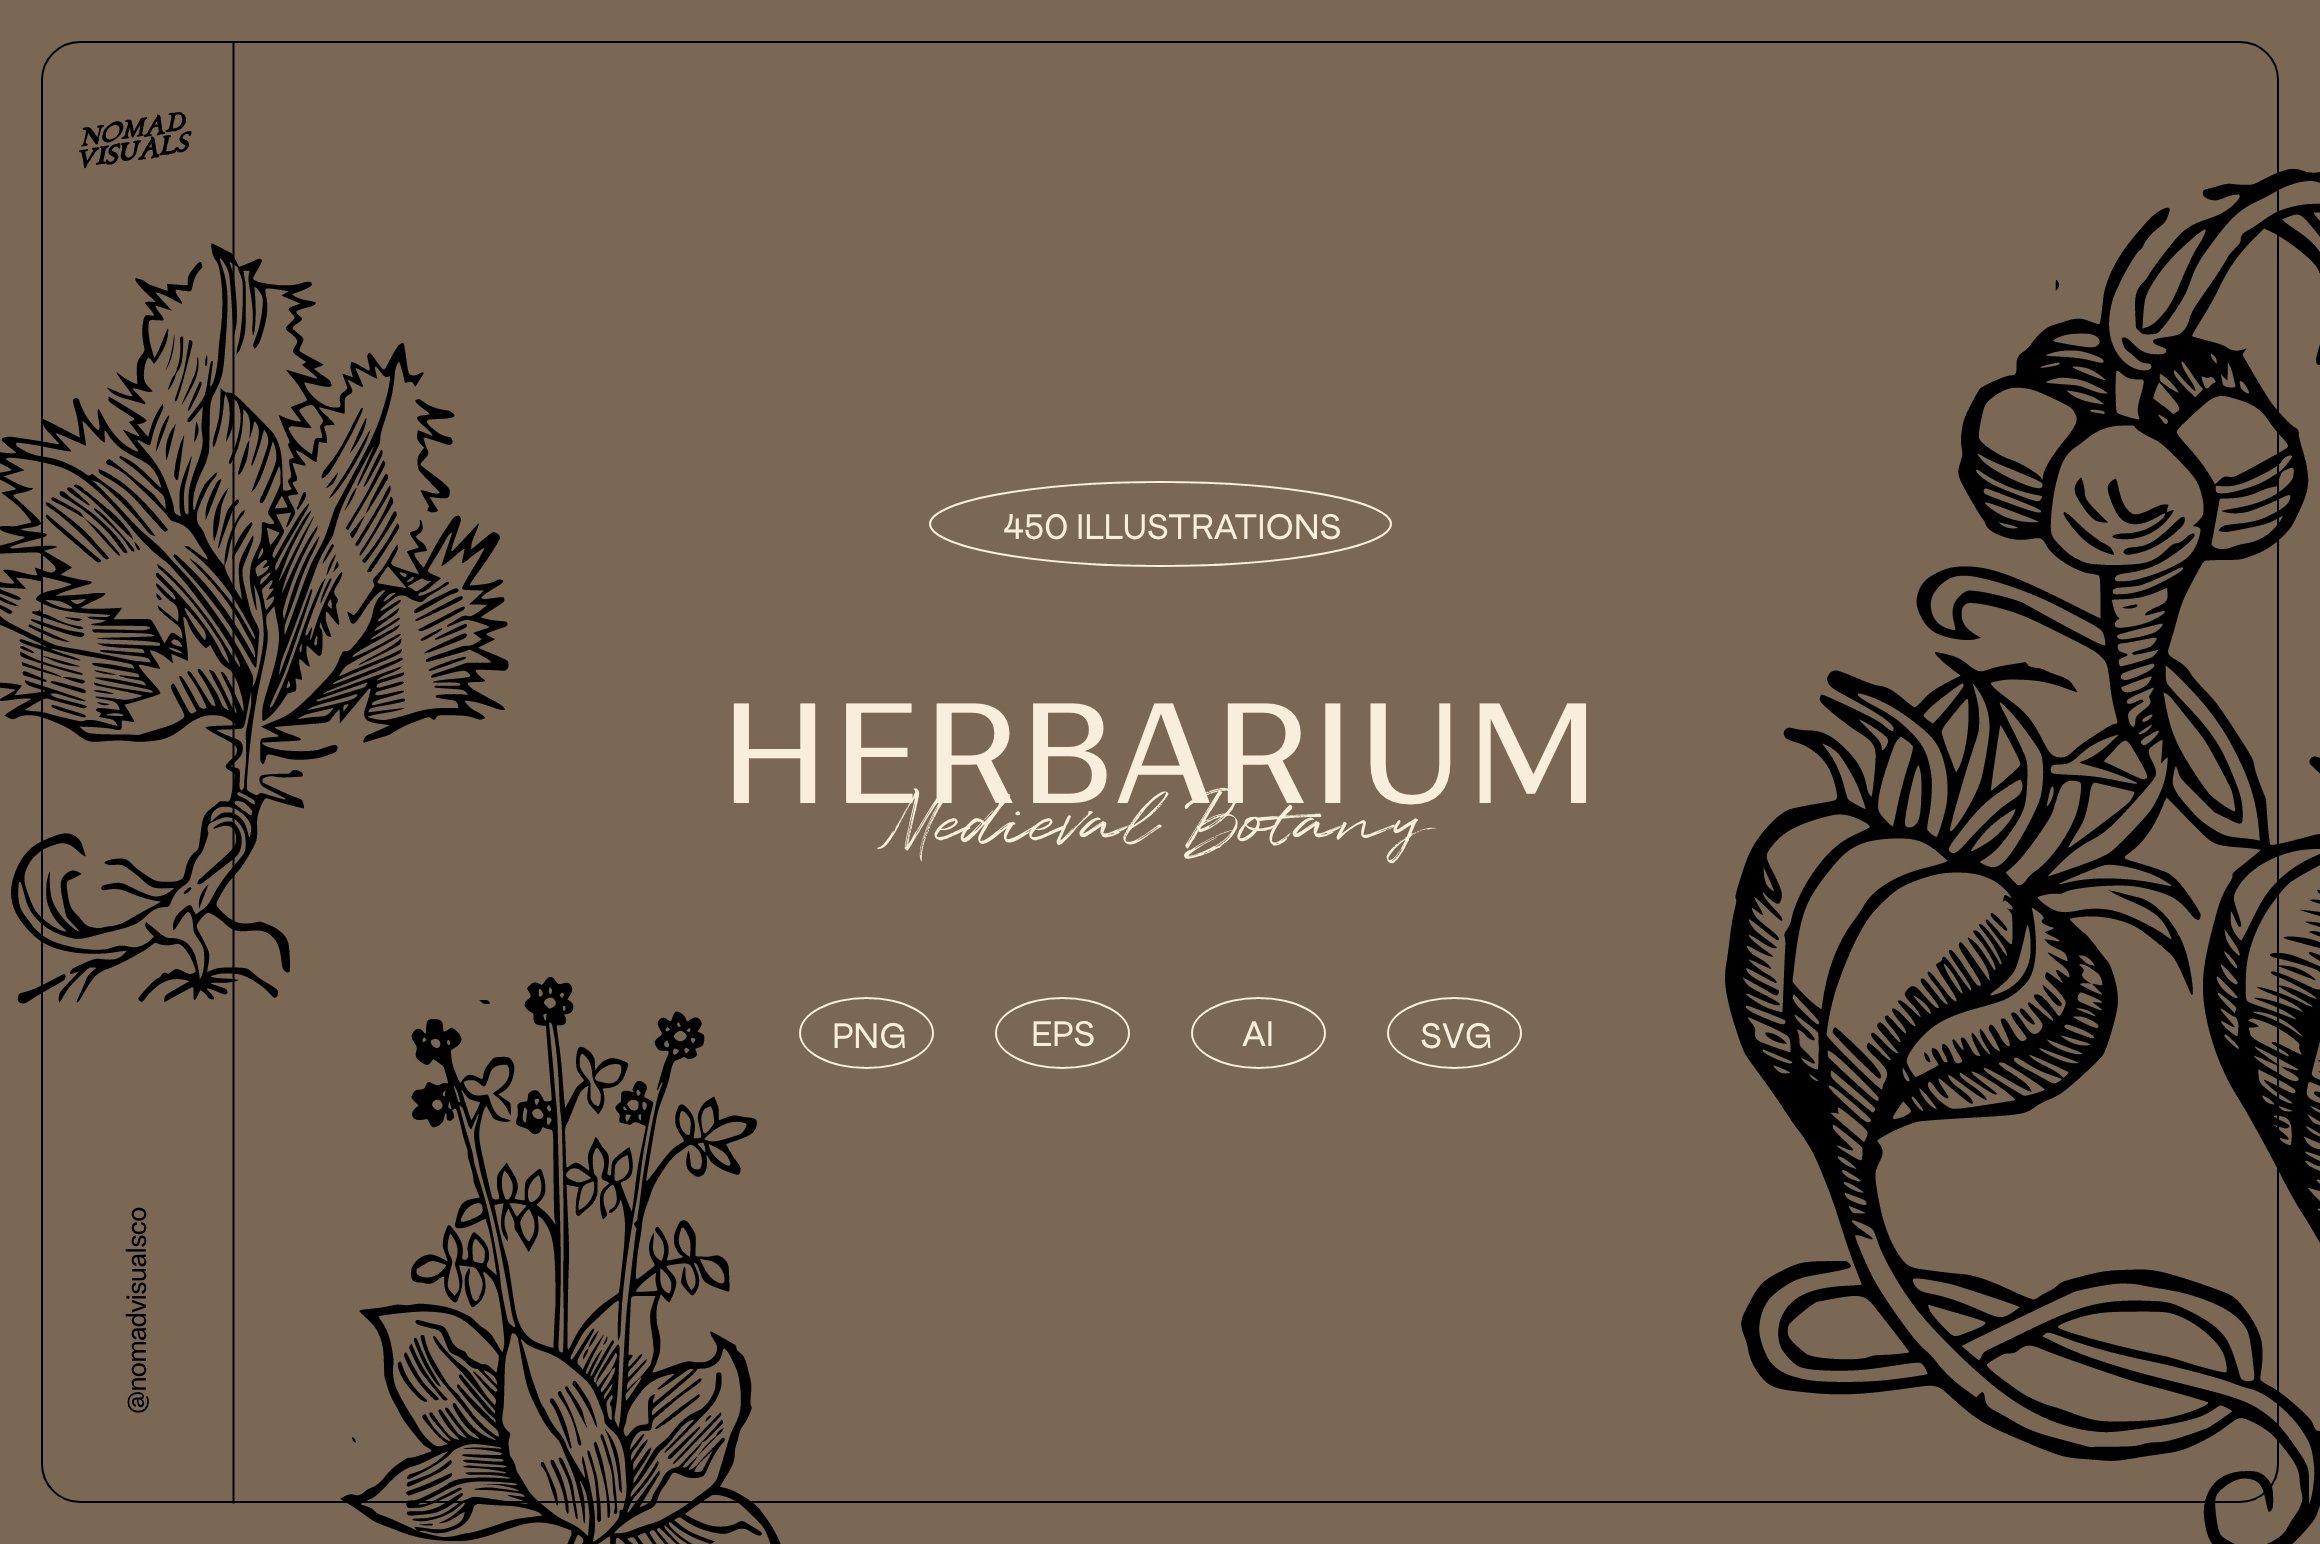 Drawing of herbs and flowers on a brown background.